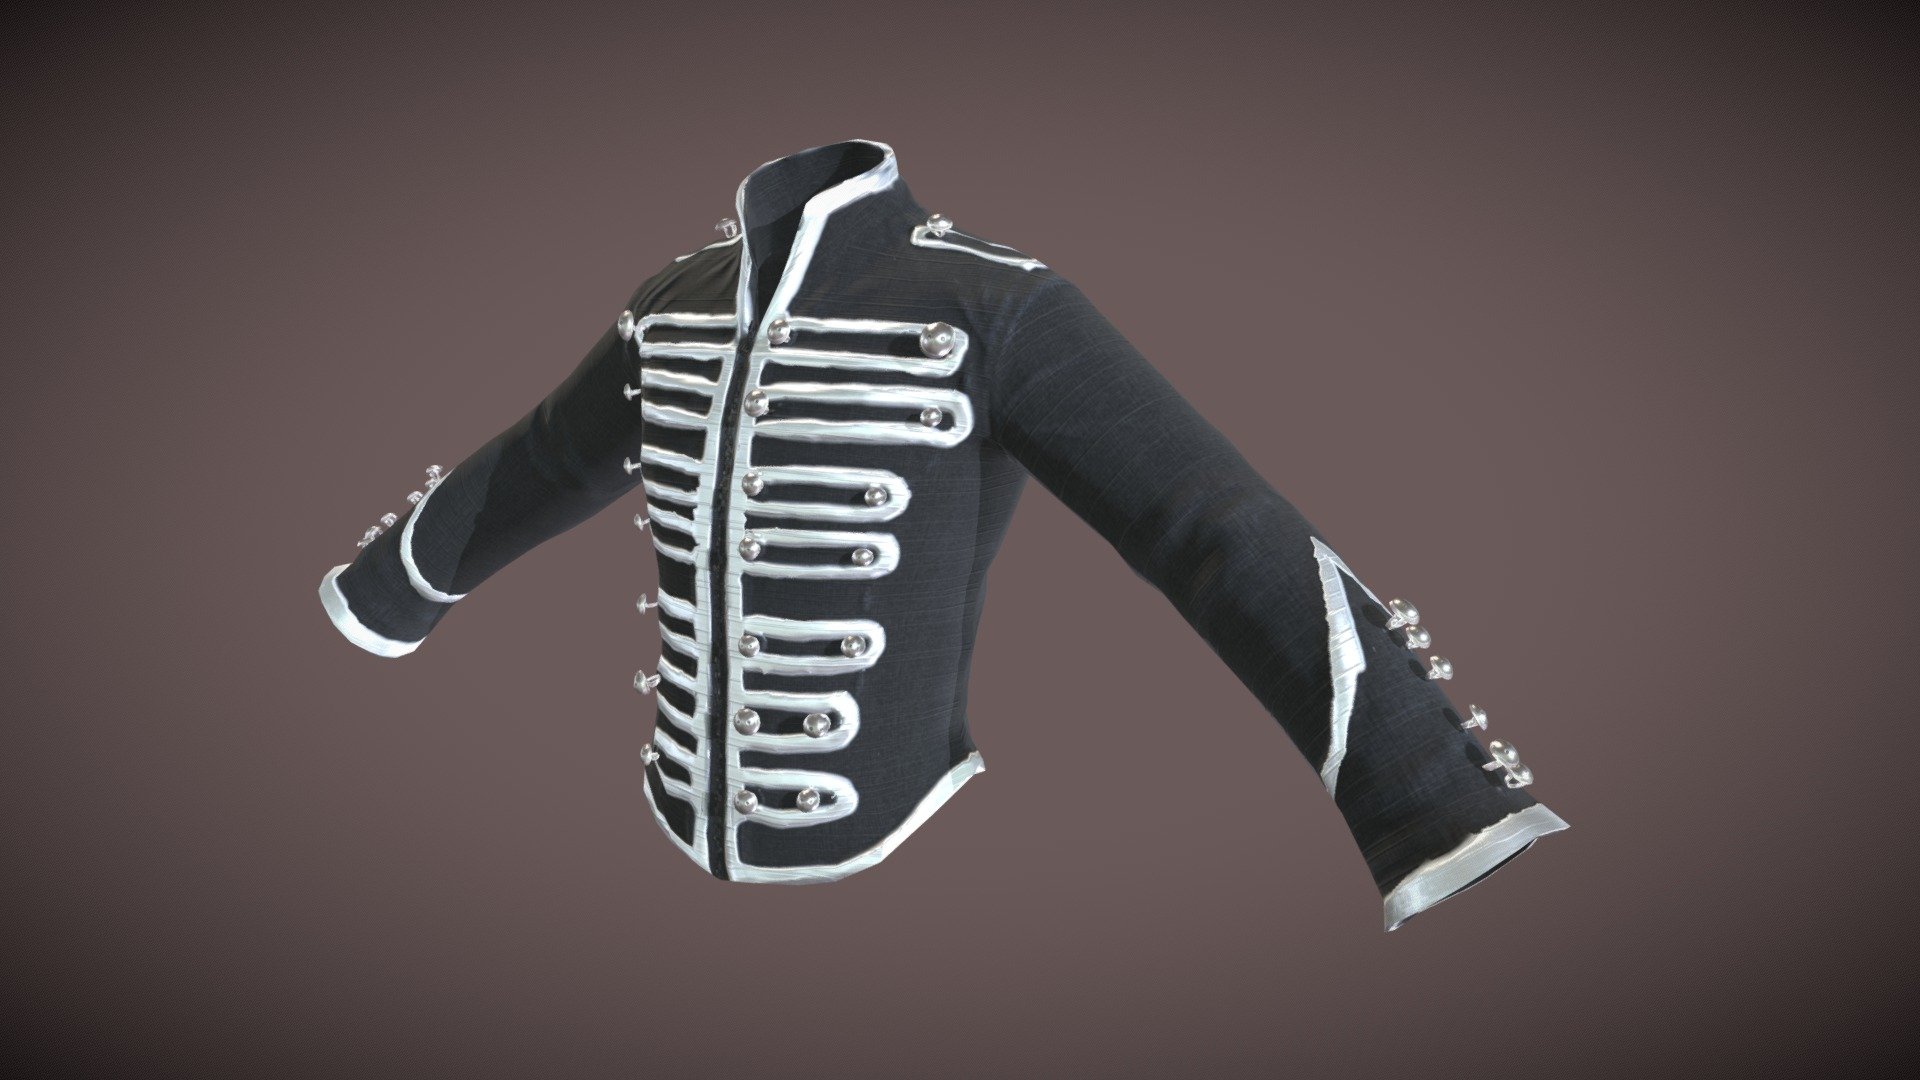 Black Parade Jacket - Download Free 3D model by MaIeficar [7638481 ...